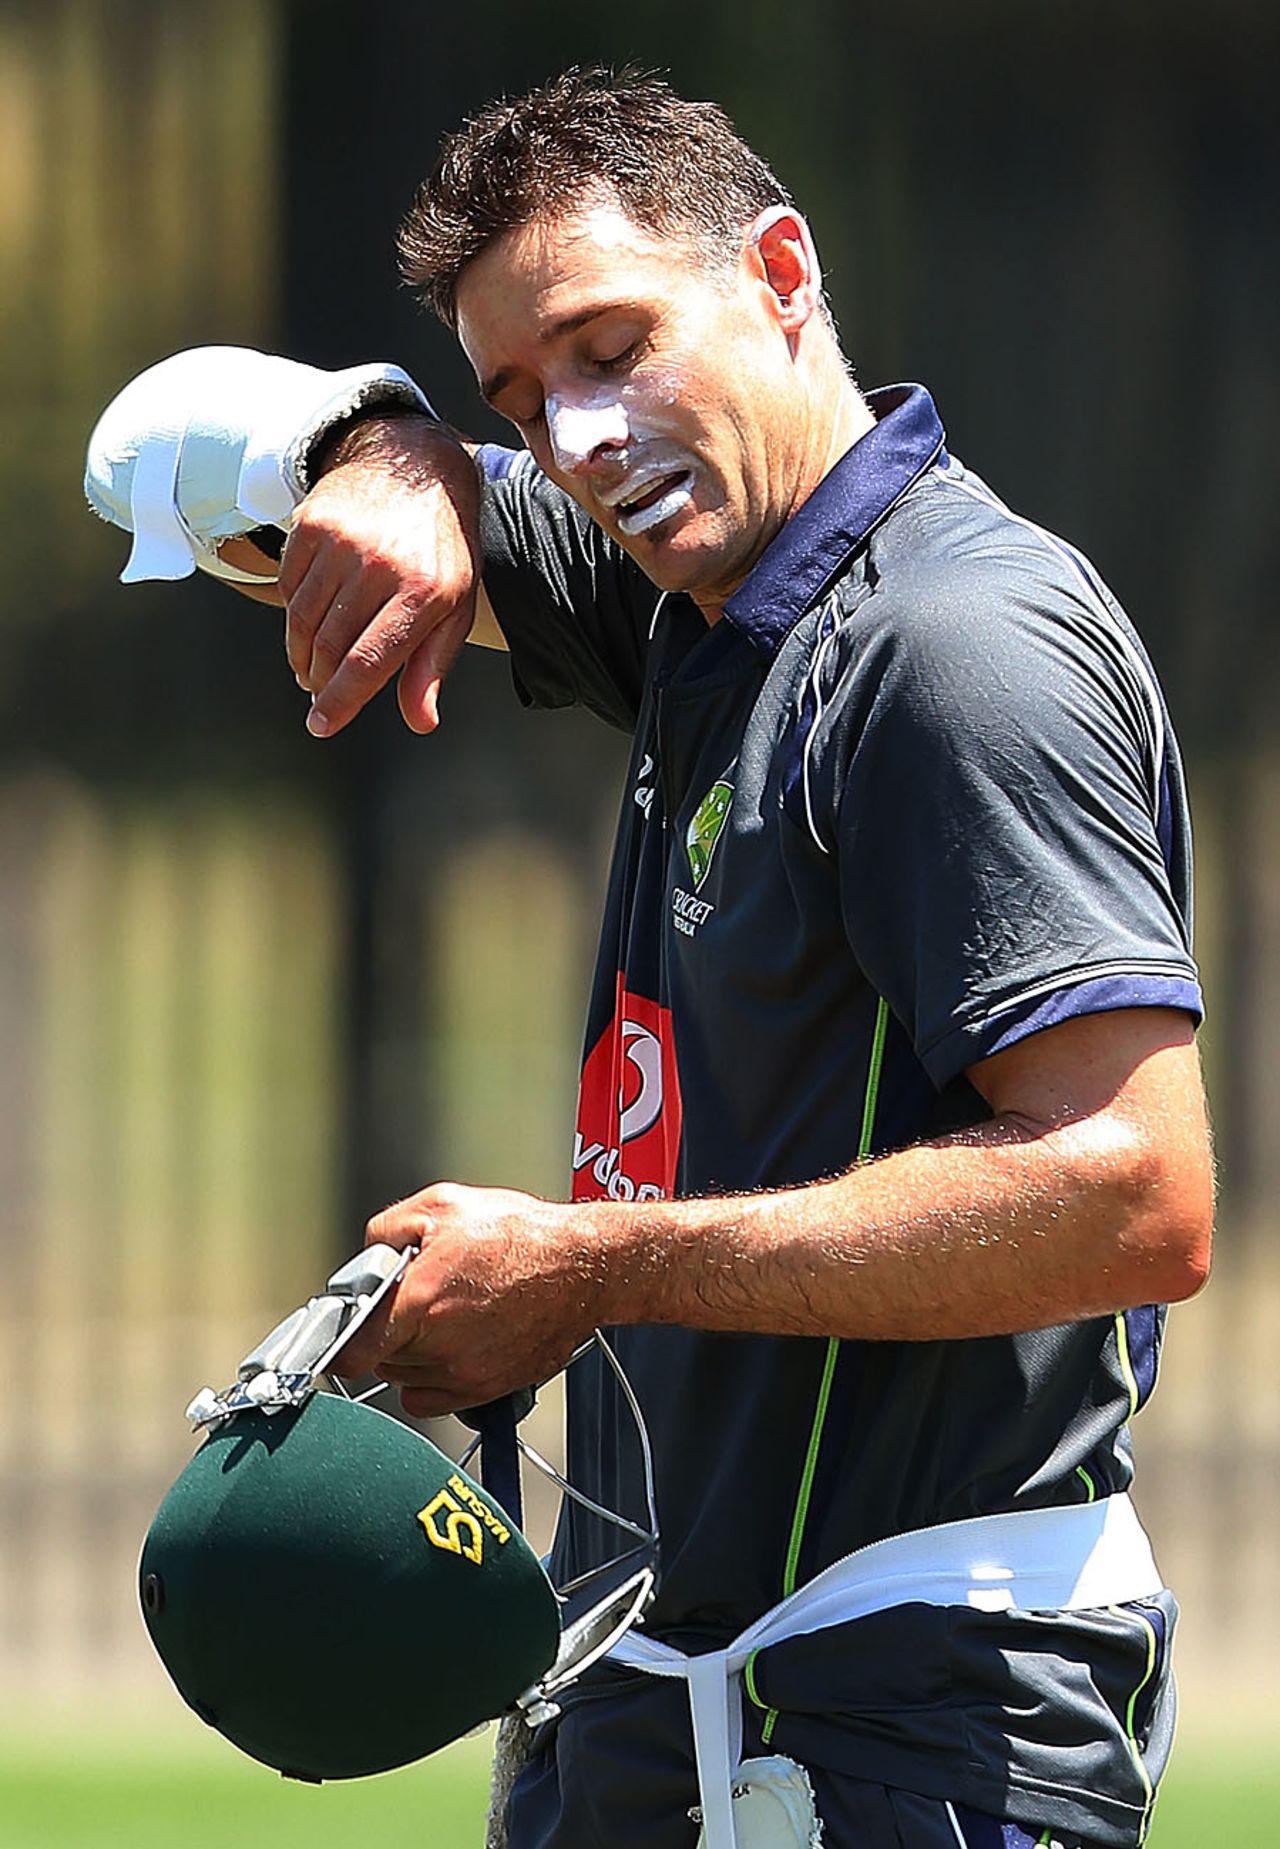 Michael Hussey wipes off his sweat during training, Sydney, January 1, 2013